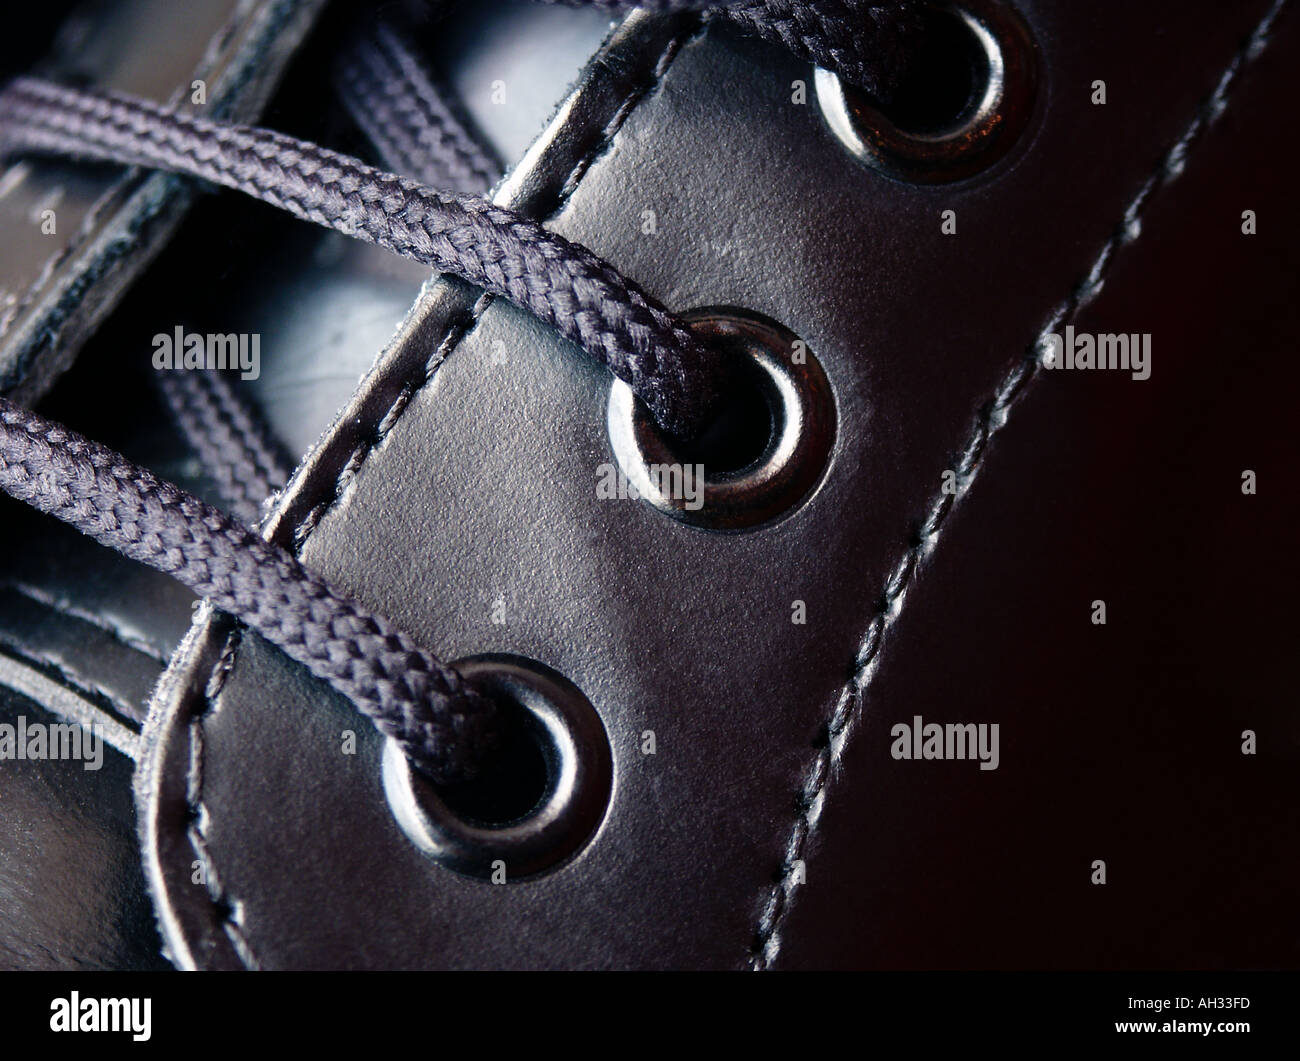 Boot Black Leather Lace Eyelet Close up Close Stitching Three Texture Smooth Polished tie weave tight cord pulled fasten Stock Photo